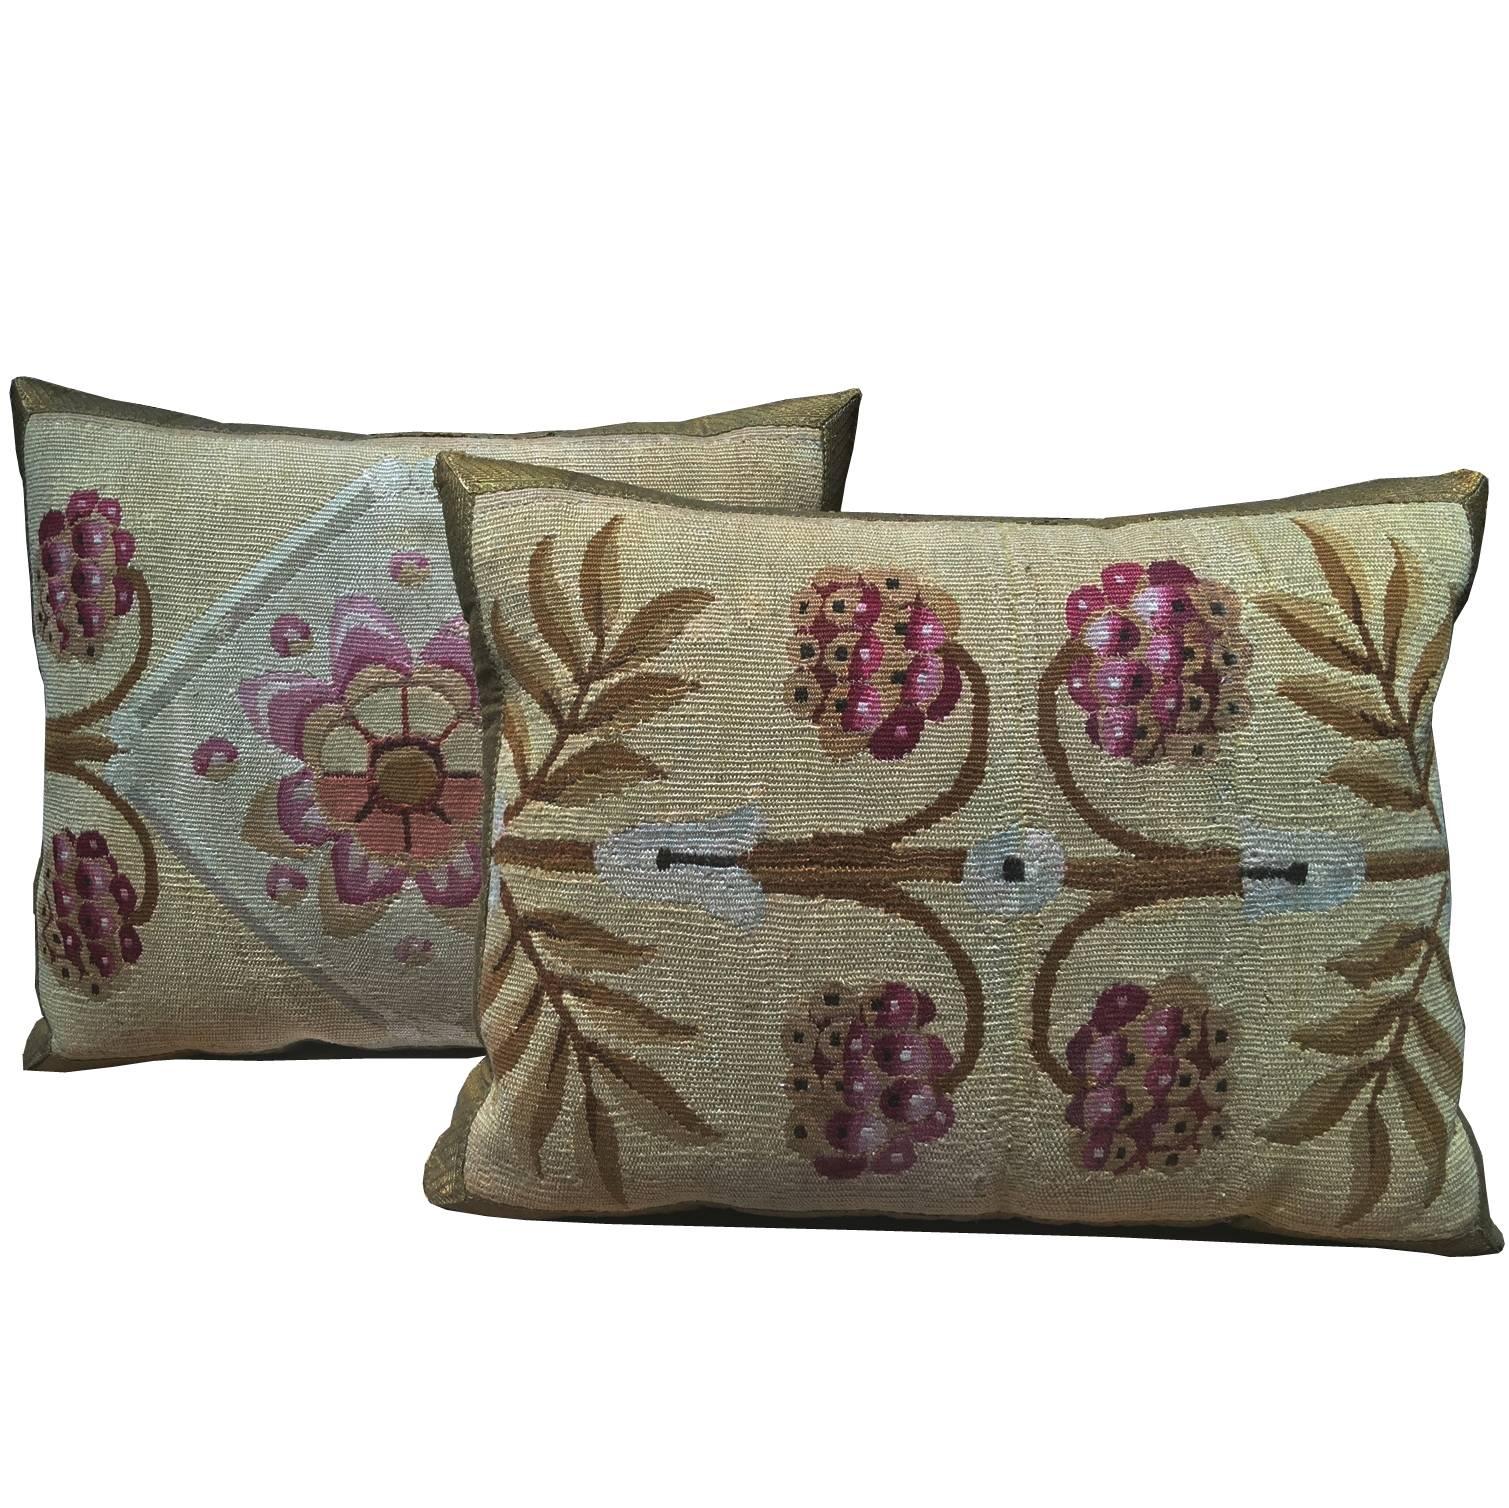 Pair of Antique French Aubusson Pillows, circa 1850 For Sale